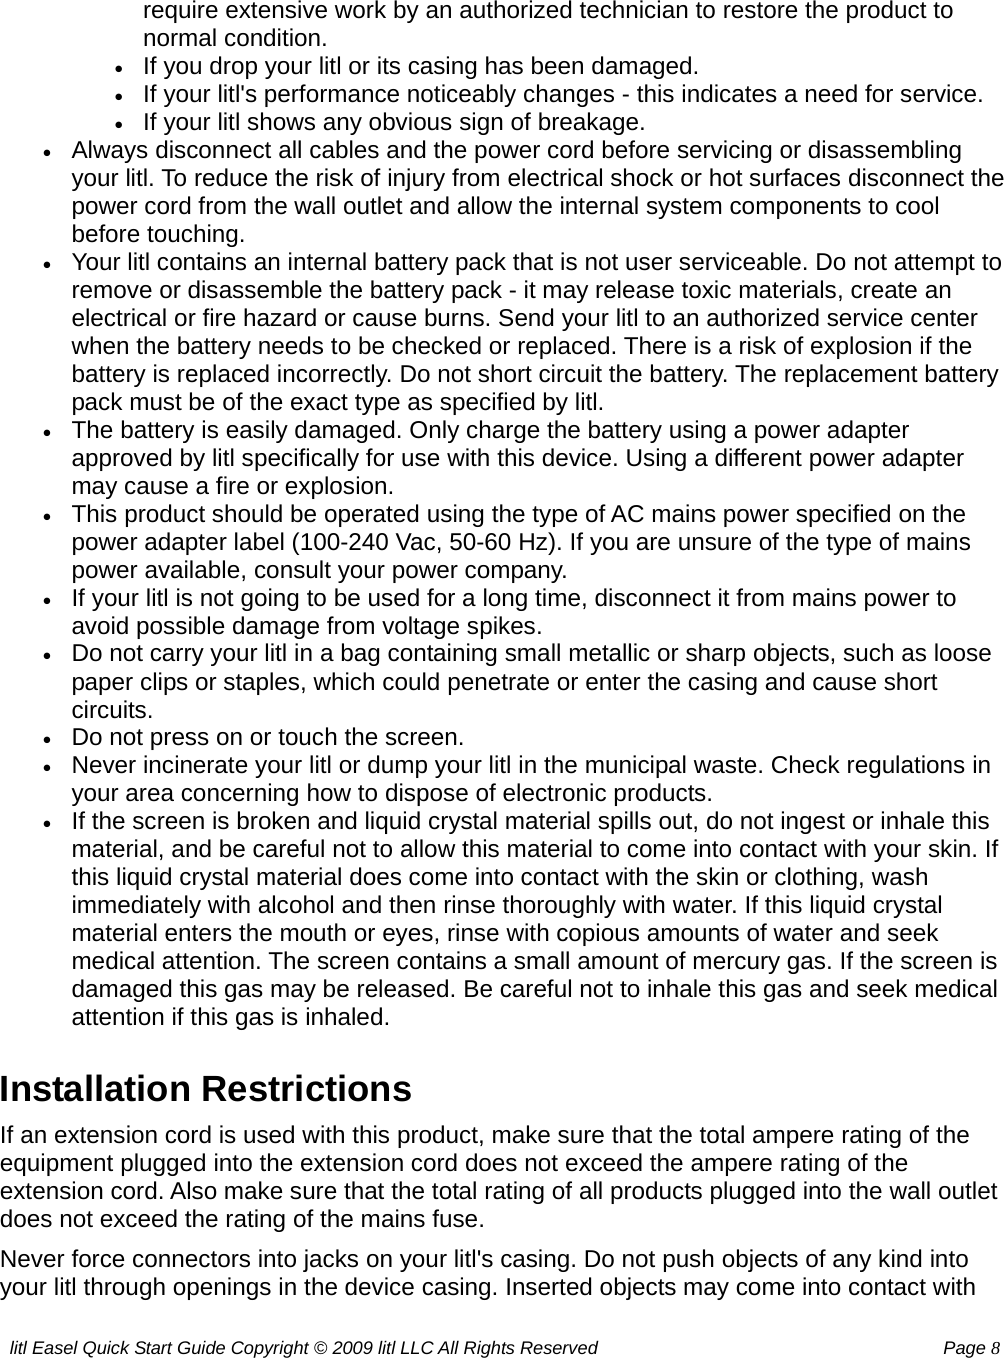 litl Easel Quick Start Guide Copyright © 2009 litl LLC All Rights Reserved          Page 8 require extensive work by an authorized technician to restore the product to normal condition.   • If you drop your litl or its casing has been damaged.   • If your litl&apos;s performance noticeably changes - this indicates a need for service.   • If your litl shows any obvious sign of breakage.   • Always disconnect all cables and the power cord before servicing or disassembling your litl. To reduce the risk of injury from electrical shock or hot surfaces disconnect the power cord from the wall outlet and allow the internal system components to cool before touching.   • Your litl contains an internal battery pack that is not user serviceable. Do not attempt to remove or disassemble the battery pack - it may release toxic materials, create an electrical or fire hazard or cause burns. Send your litl to an authorized service center when the battery needs to be checked or replaced. There is a risk of explosion if the battery is replaced incorrectly. Do not short circuit the battery. The replacement battery pack must be of the exact type as specified by litl.   • The battery is easily damaged. Only charge the battery using a power adapter approved by litl specifically for use with this device. Using a different power adapter may cause a fire or explosion.   • This product should be operated using the type of AC mains power specified on the power adapter label (100-240 Vac, 50-60 Hz). If you are unsure of the type of mains power available, consult your power company.  • If your litl is not going to be used for a long time, disconnect it from mains power to avoid possible damage from voltage spikes.   • Do not carry your litl in a bag containing small metallic or sharp objects, such as loose paper clips or staples, which could penetrate or enter the casing and cause short circuits.  • Do not press on or touch the screen.   • Never incinerate your litl or dump your litl in the municipal waste. Check regulations in your area concerning how to dispose of electronic products.   • If the screen is broken and liquid crystal material spills out, do not ingest or inhale this material, and be careful not to allow this material to come into contact with your skin. If this liquid crystal material does come into contact with the skin or clothing, wash immediately with alcohol and then rinse thoroughly with water. If this liquid crystal material enters the mouth or eyes, rinse with copious amounts of water and seek medical attention. The screen contains a small amount of mercury gas. If the screen is damaged this gas may be released. Be careful not to inhale this gas and seek medical attention if this gas is inhaled.   Installation Restrictions If an extension cord is used with this product, make sure that the total ampere rating of the equipment plugged into the extension cord does not exceed the ampere rating of the extension cord. Also make sure that the total rating of all products plugged into the wall outlet does not exceed the rating of the mains fuse. Never force connectors into jacks on your litl&apos;s casing. Do not push objects of any kind into your litl through openings in the device casing. Inserted objects may come into contact with 